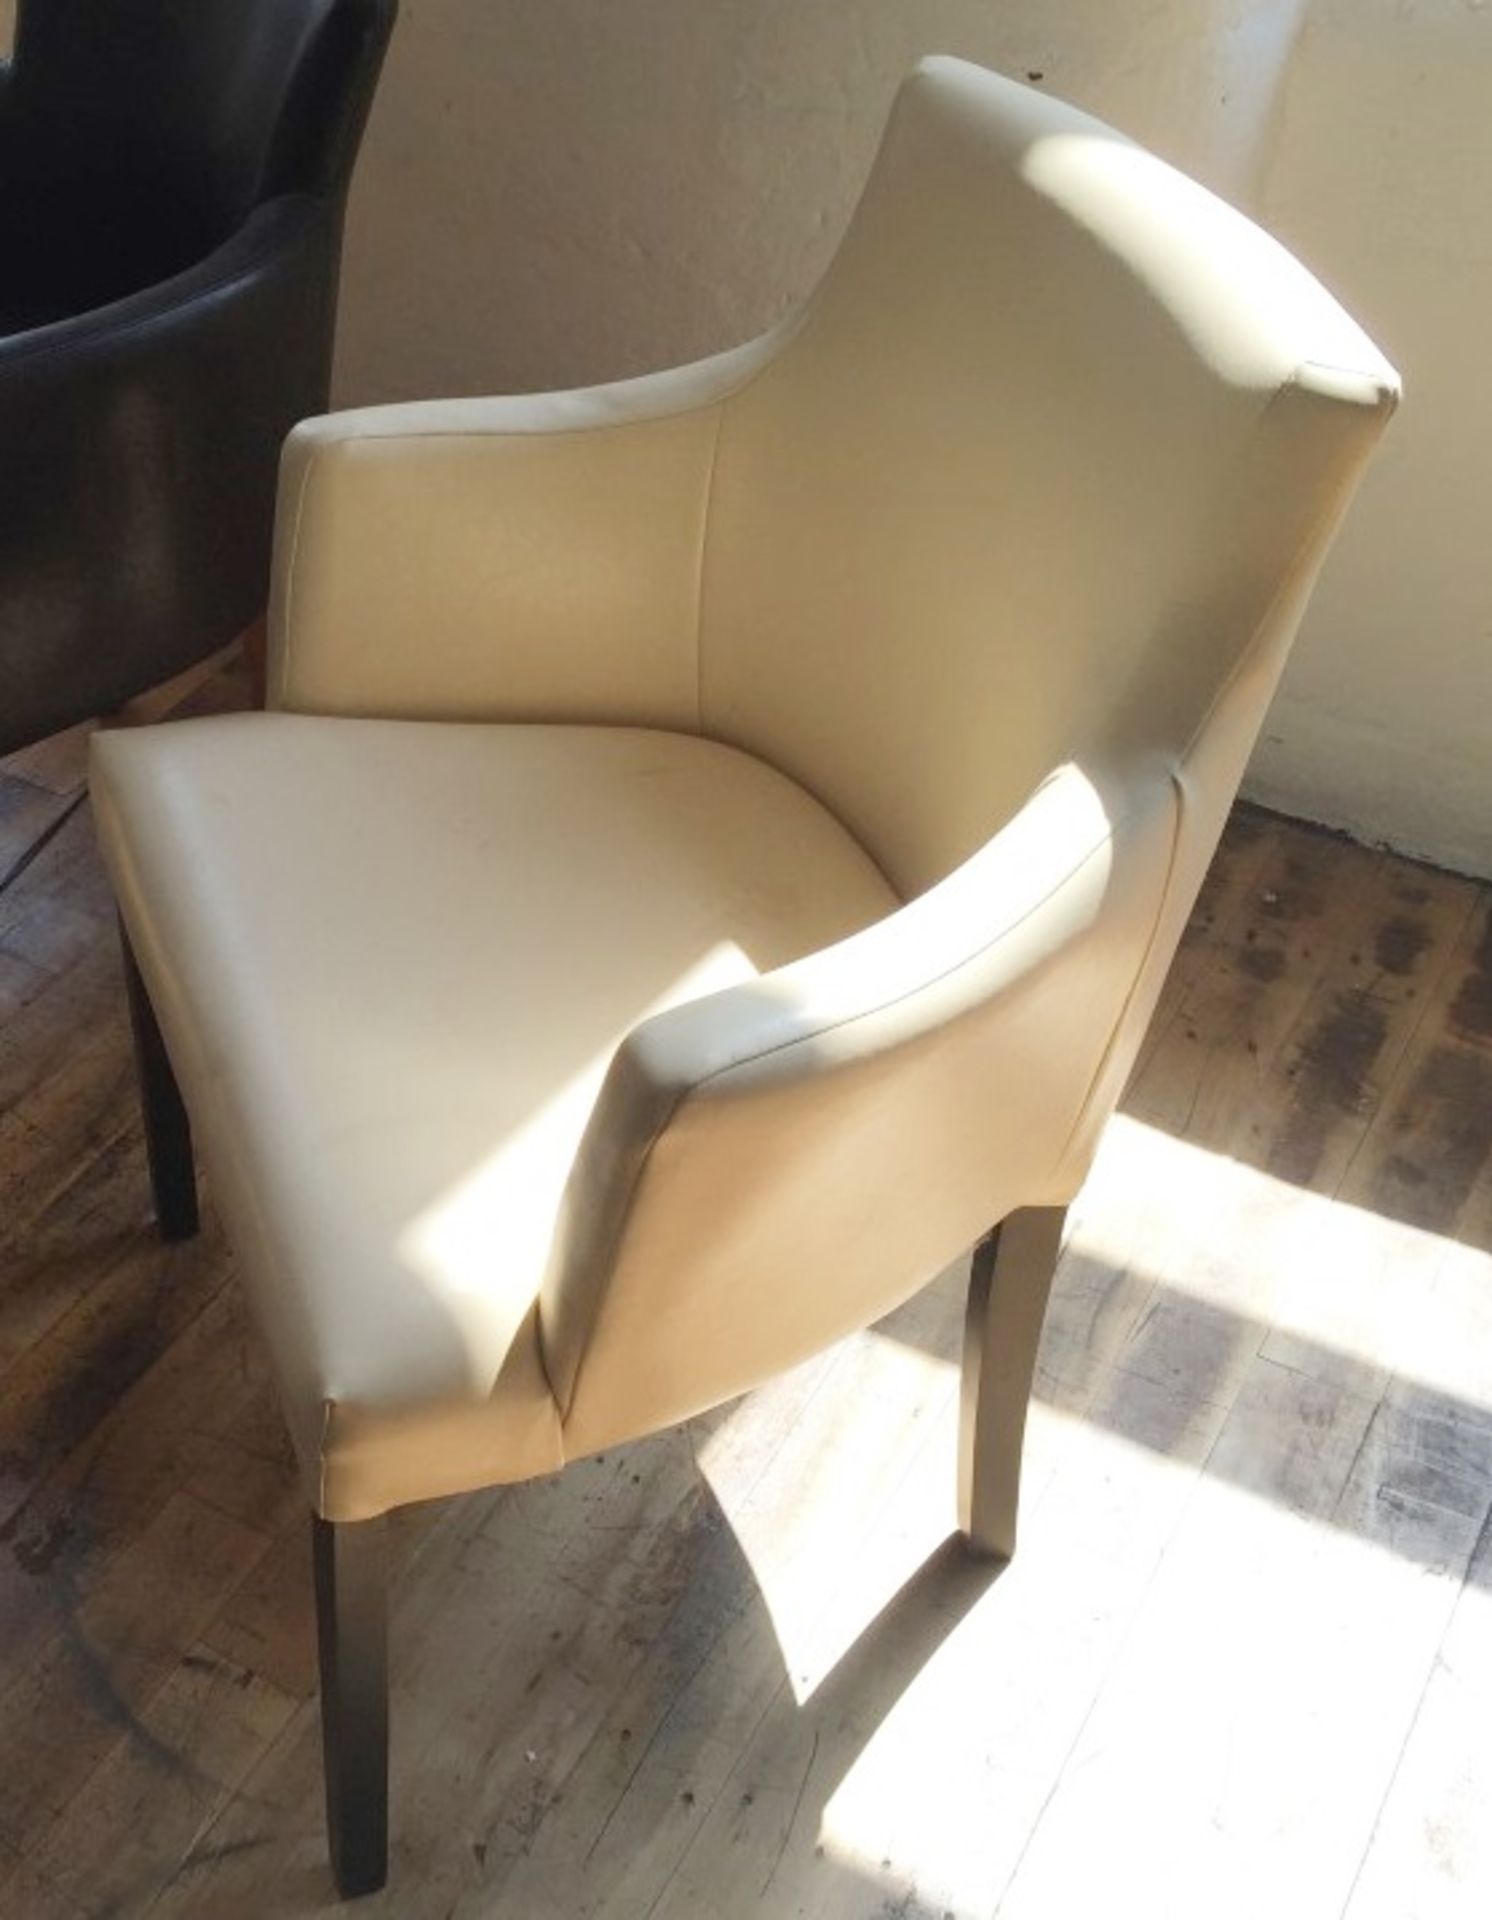 1 x Faux Leather Chair In Cream - Ref: NDE016B - CL122 - Location: Bury BL8 All furniture items - Image 2 of 4